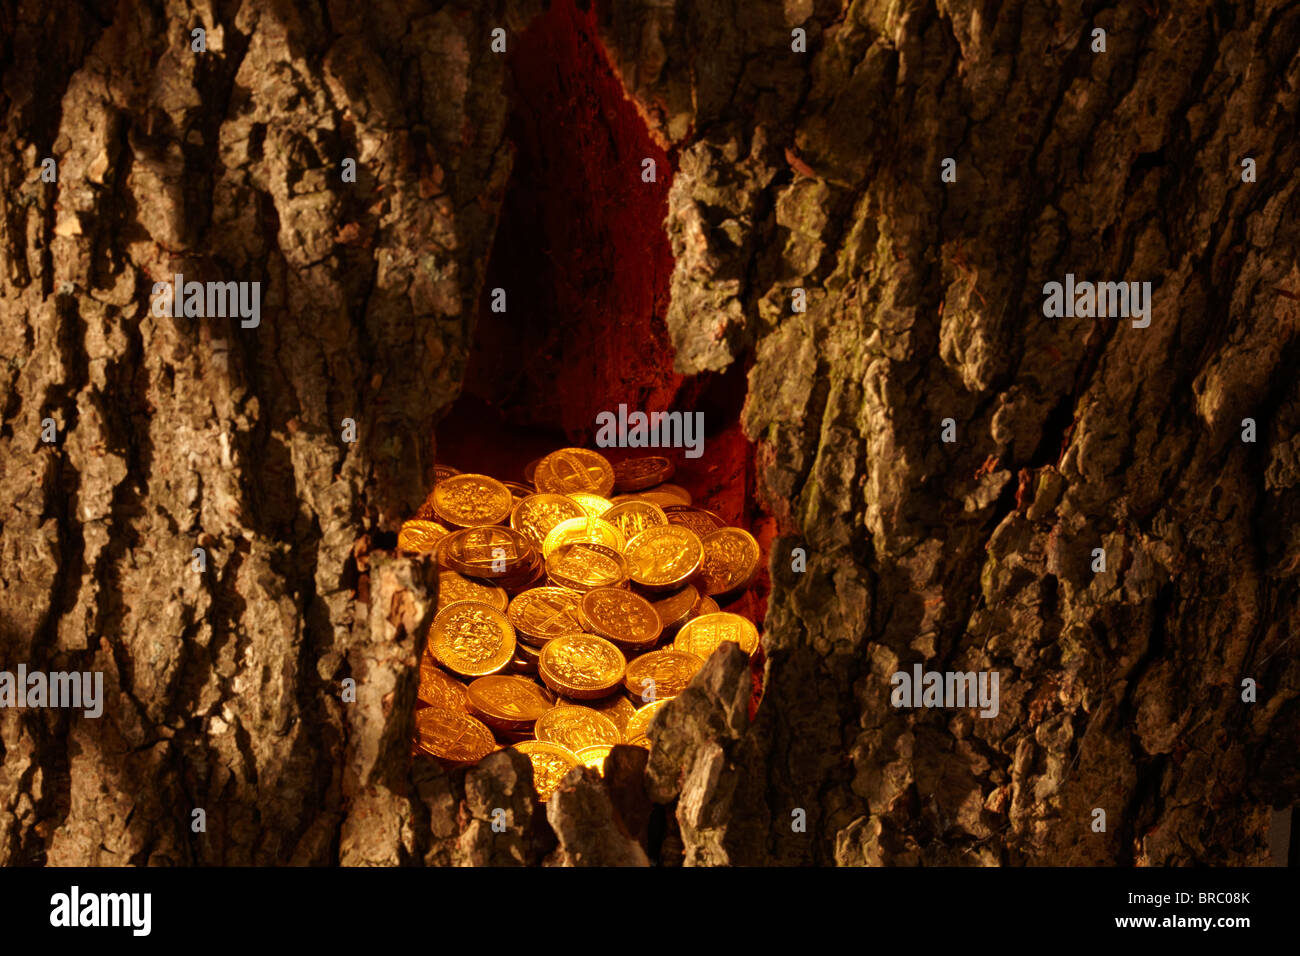 Gold pound coins in tree trunk Stock Photo